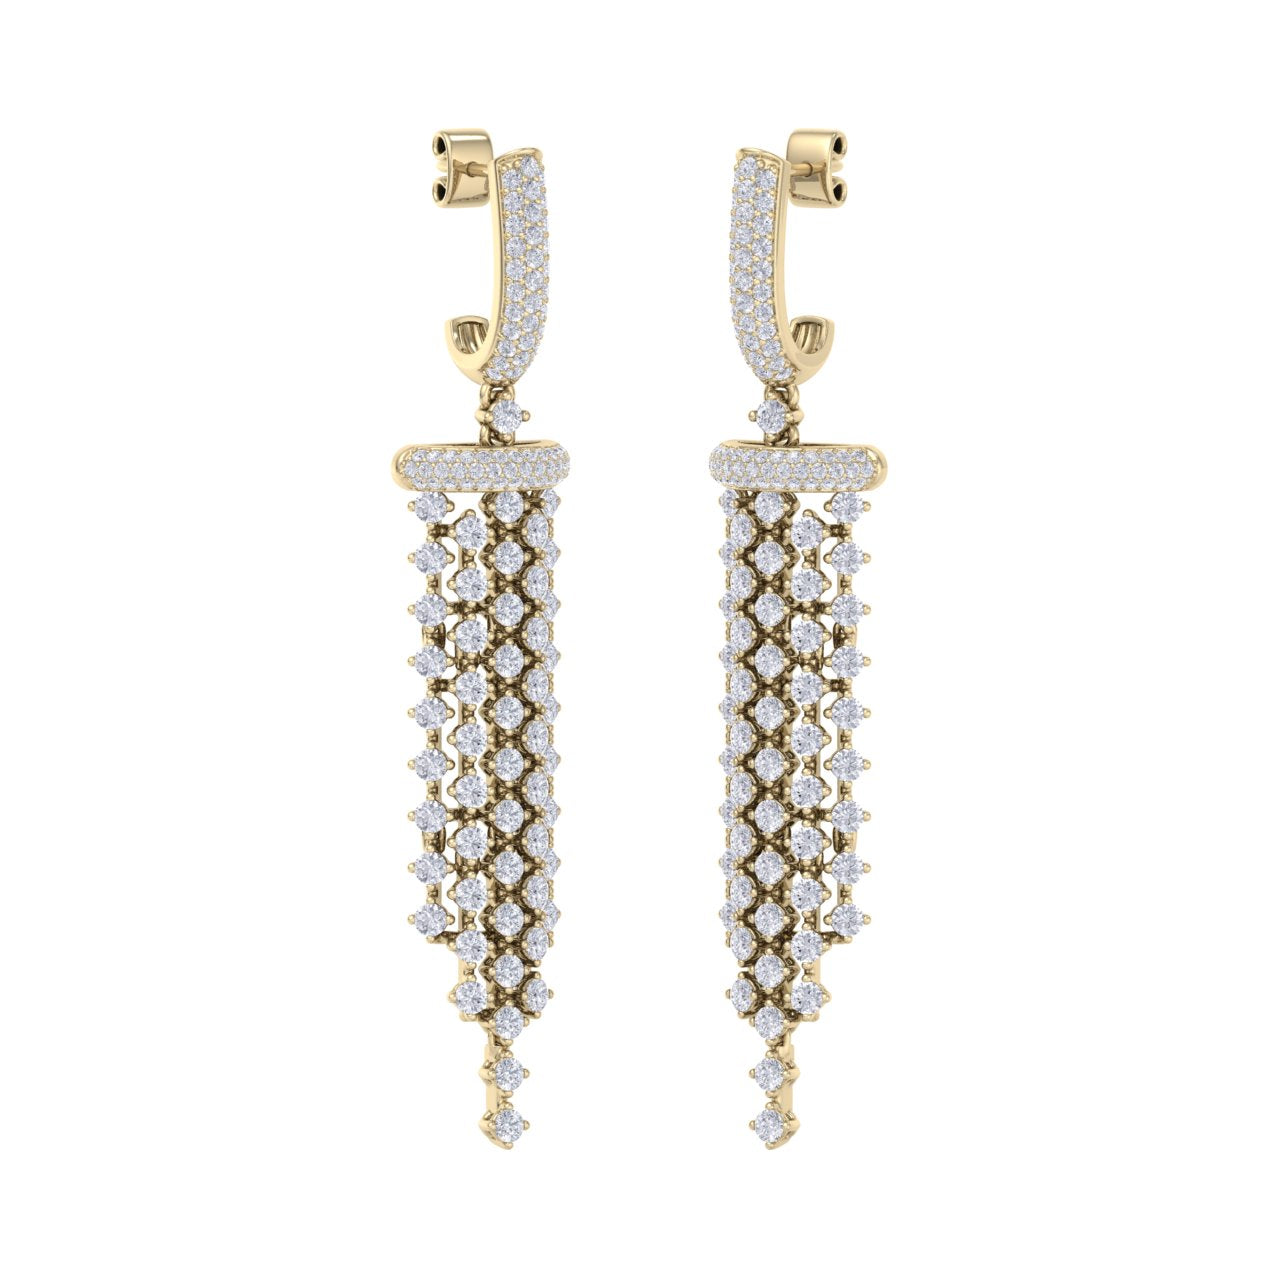 Chandelier earrings in yellow gold with white diamonds 4.48 ct in weight